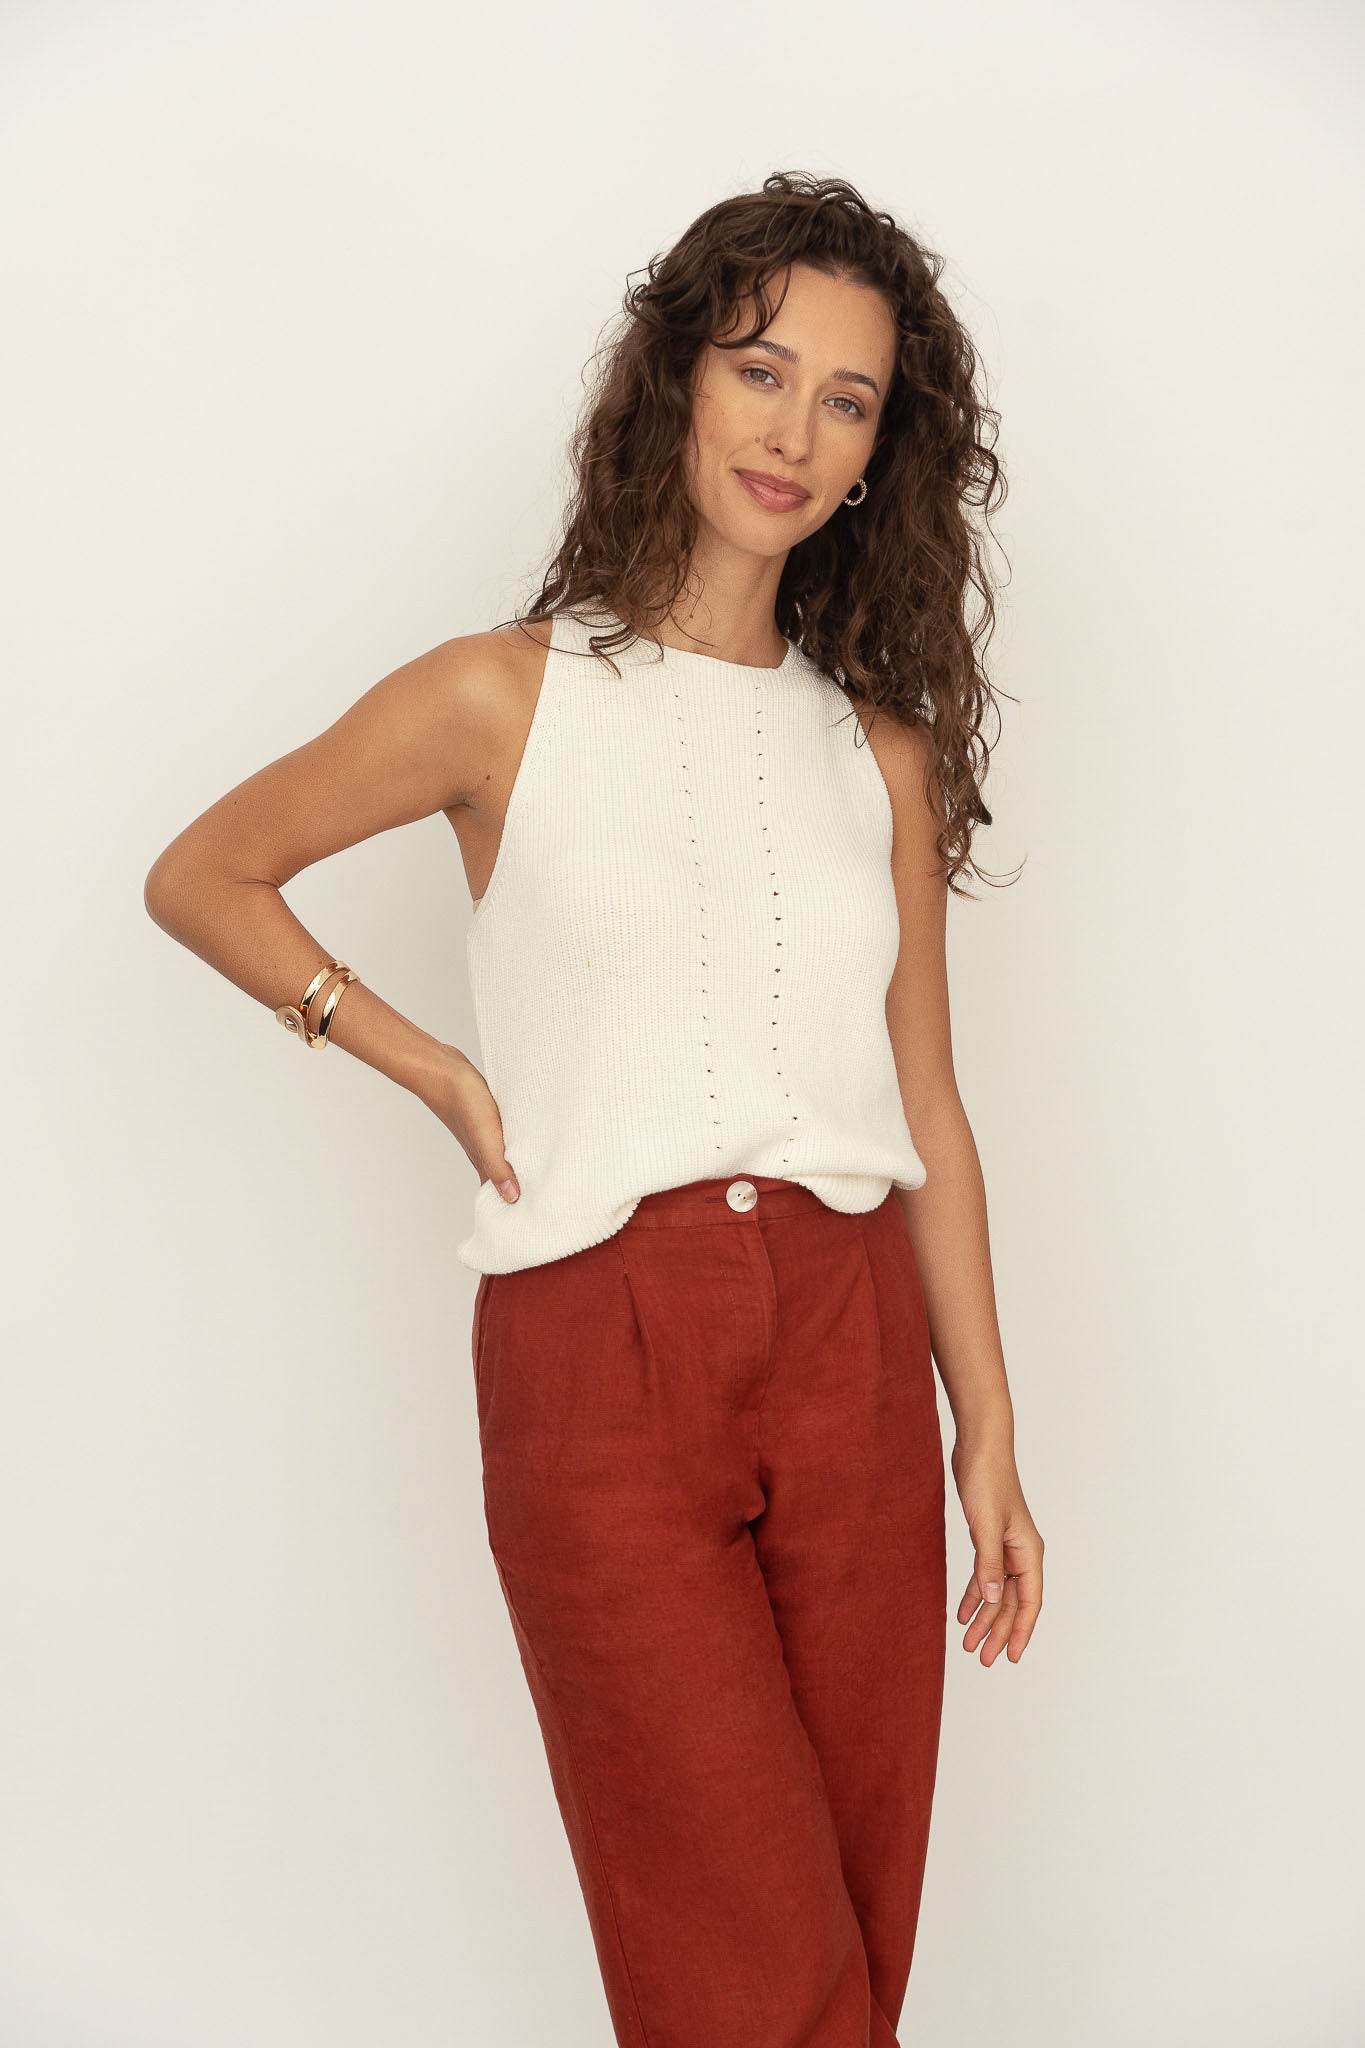 Naz women's tailored linen trousers in rust. Ethically made in Portugal. 